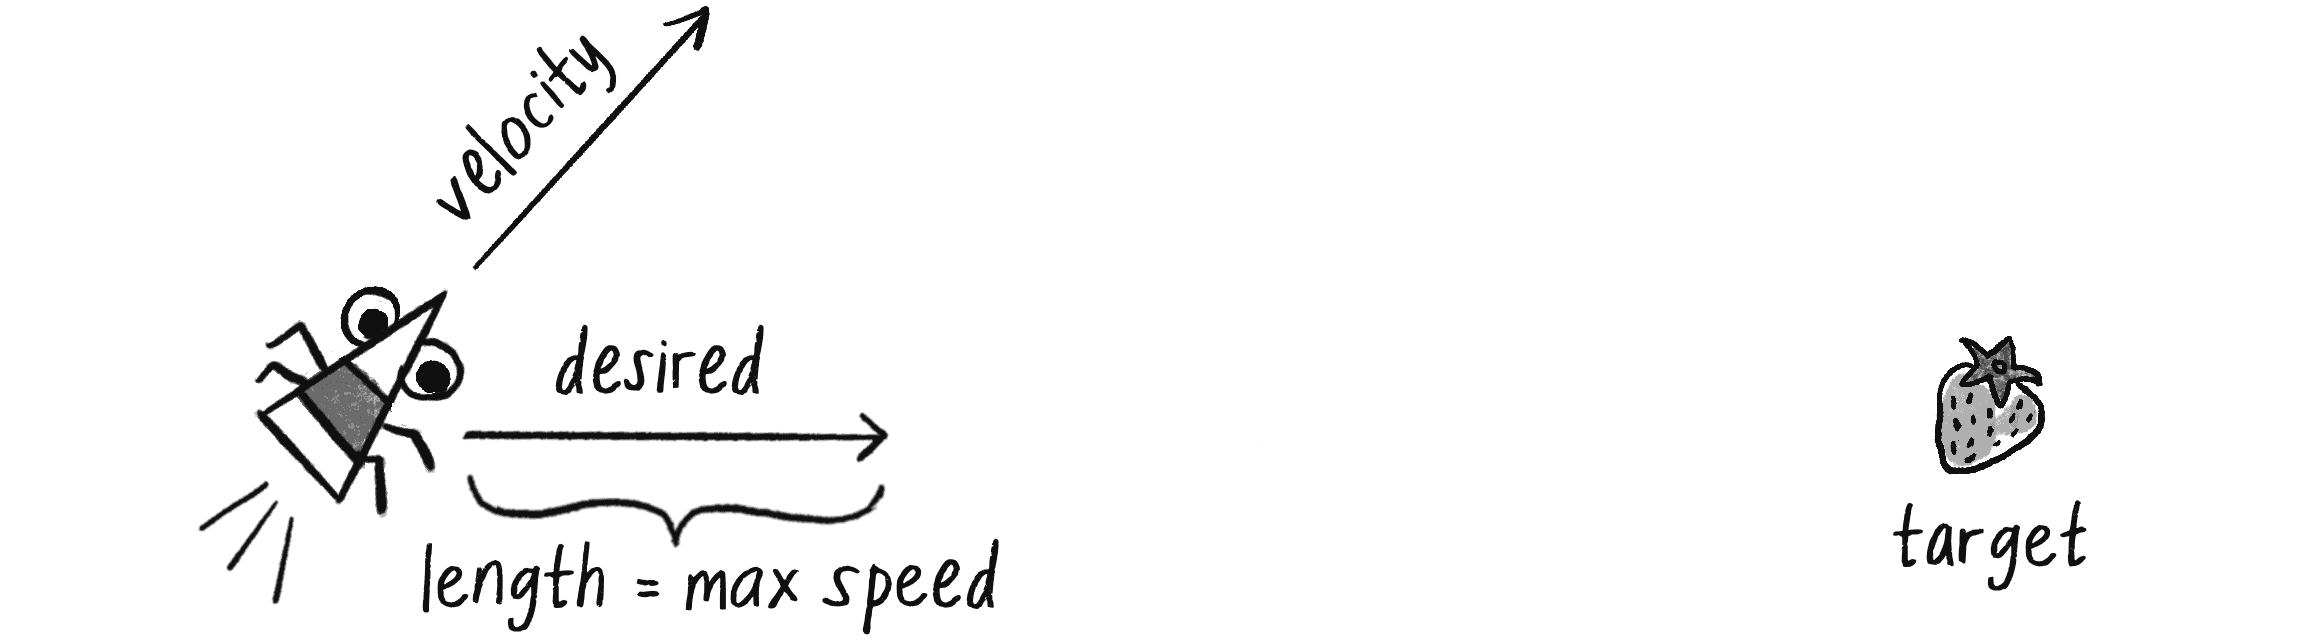 Figure 5.3: The magnitude of the vehicle’s desired velocity is max speed.